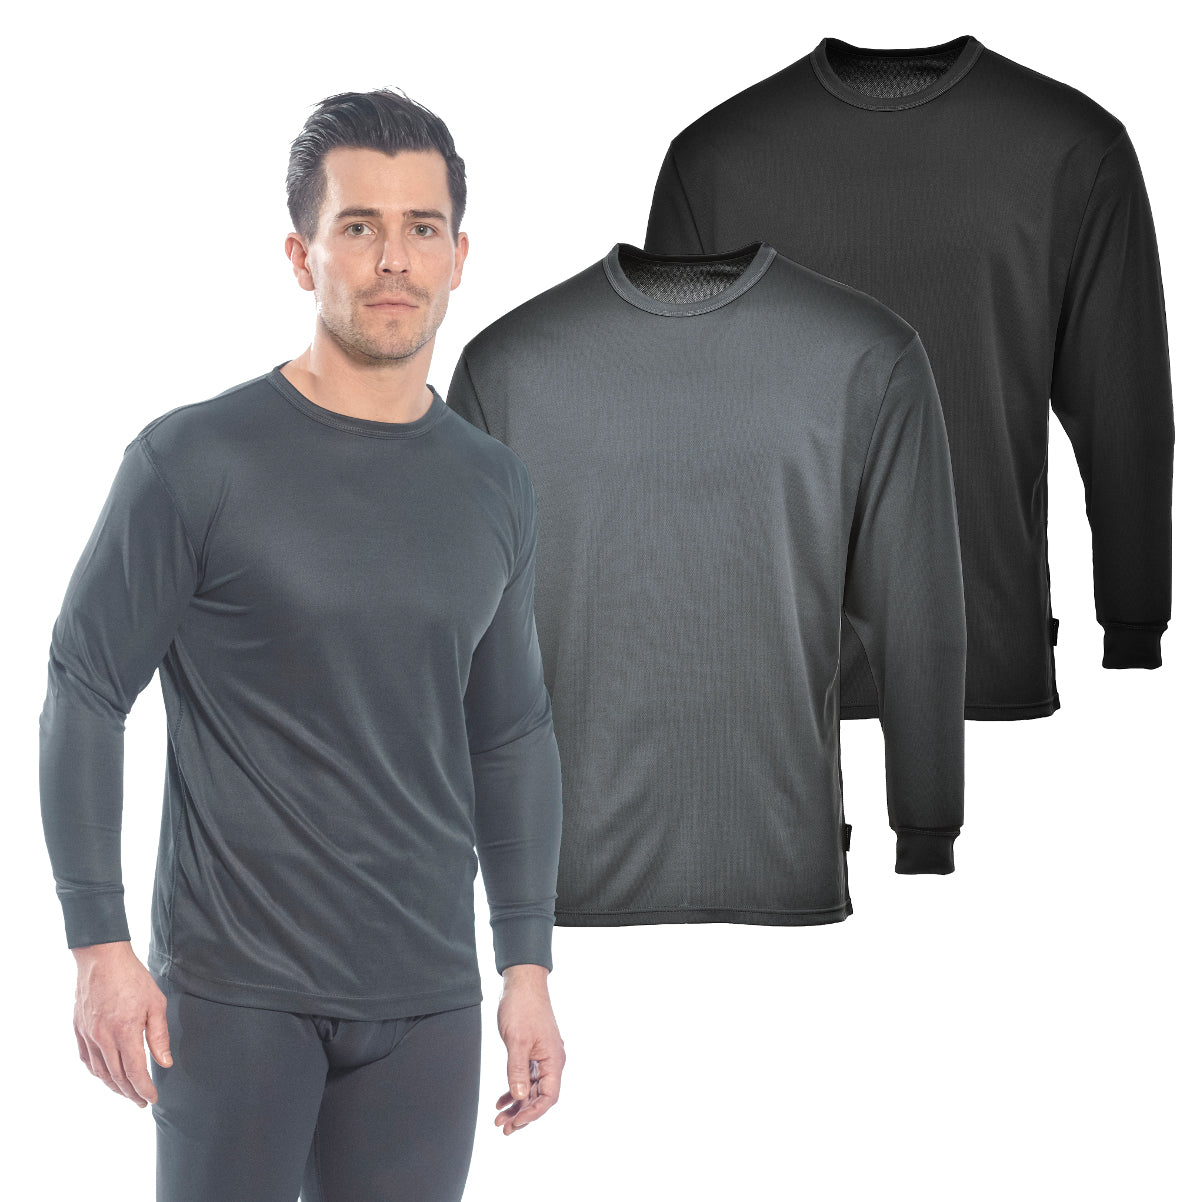 Portwest B133 - Thermal Baselayer Top Workwear - Black Charcoal